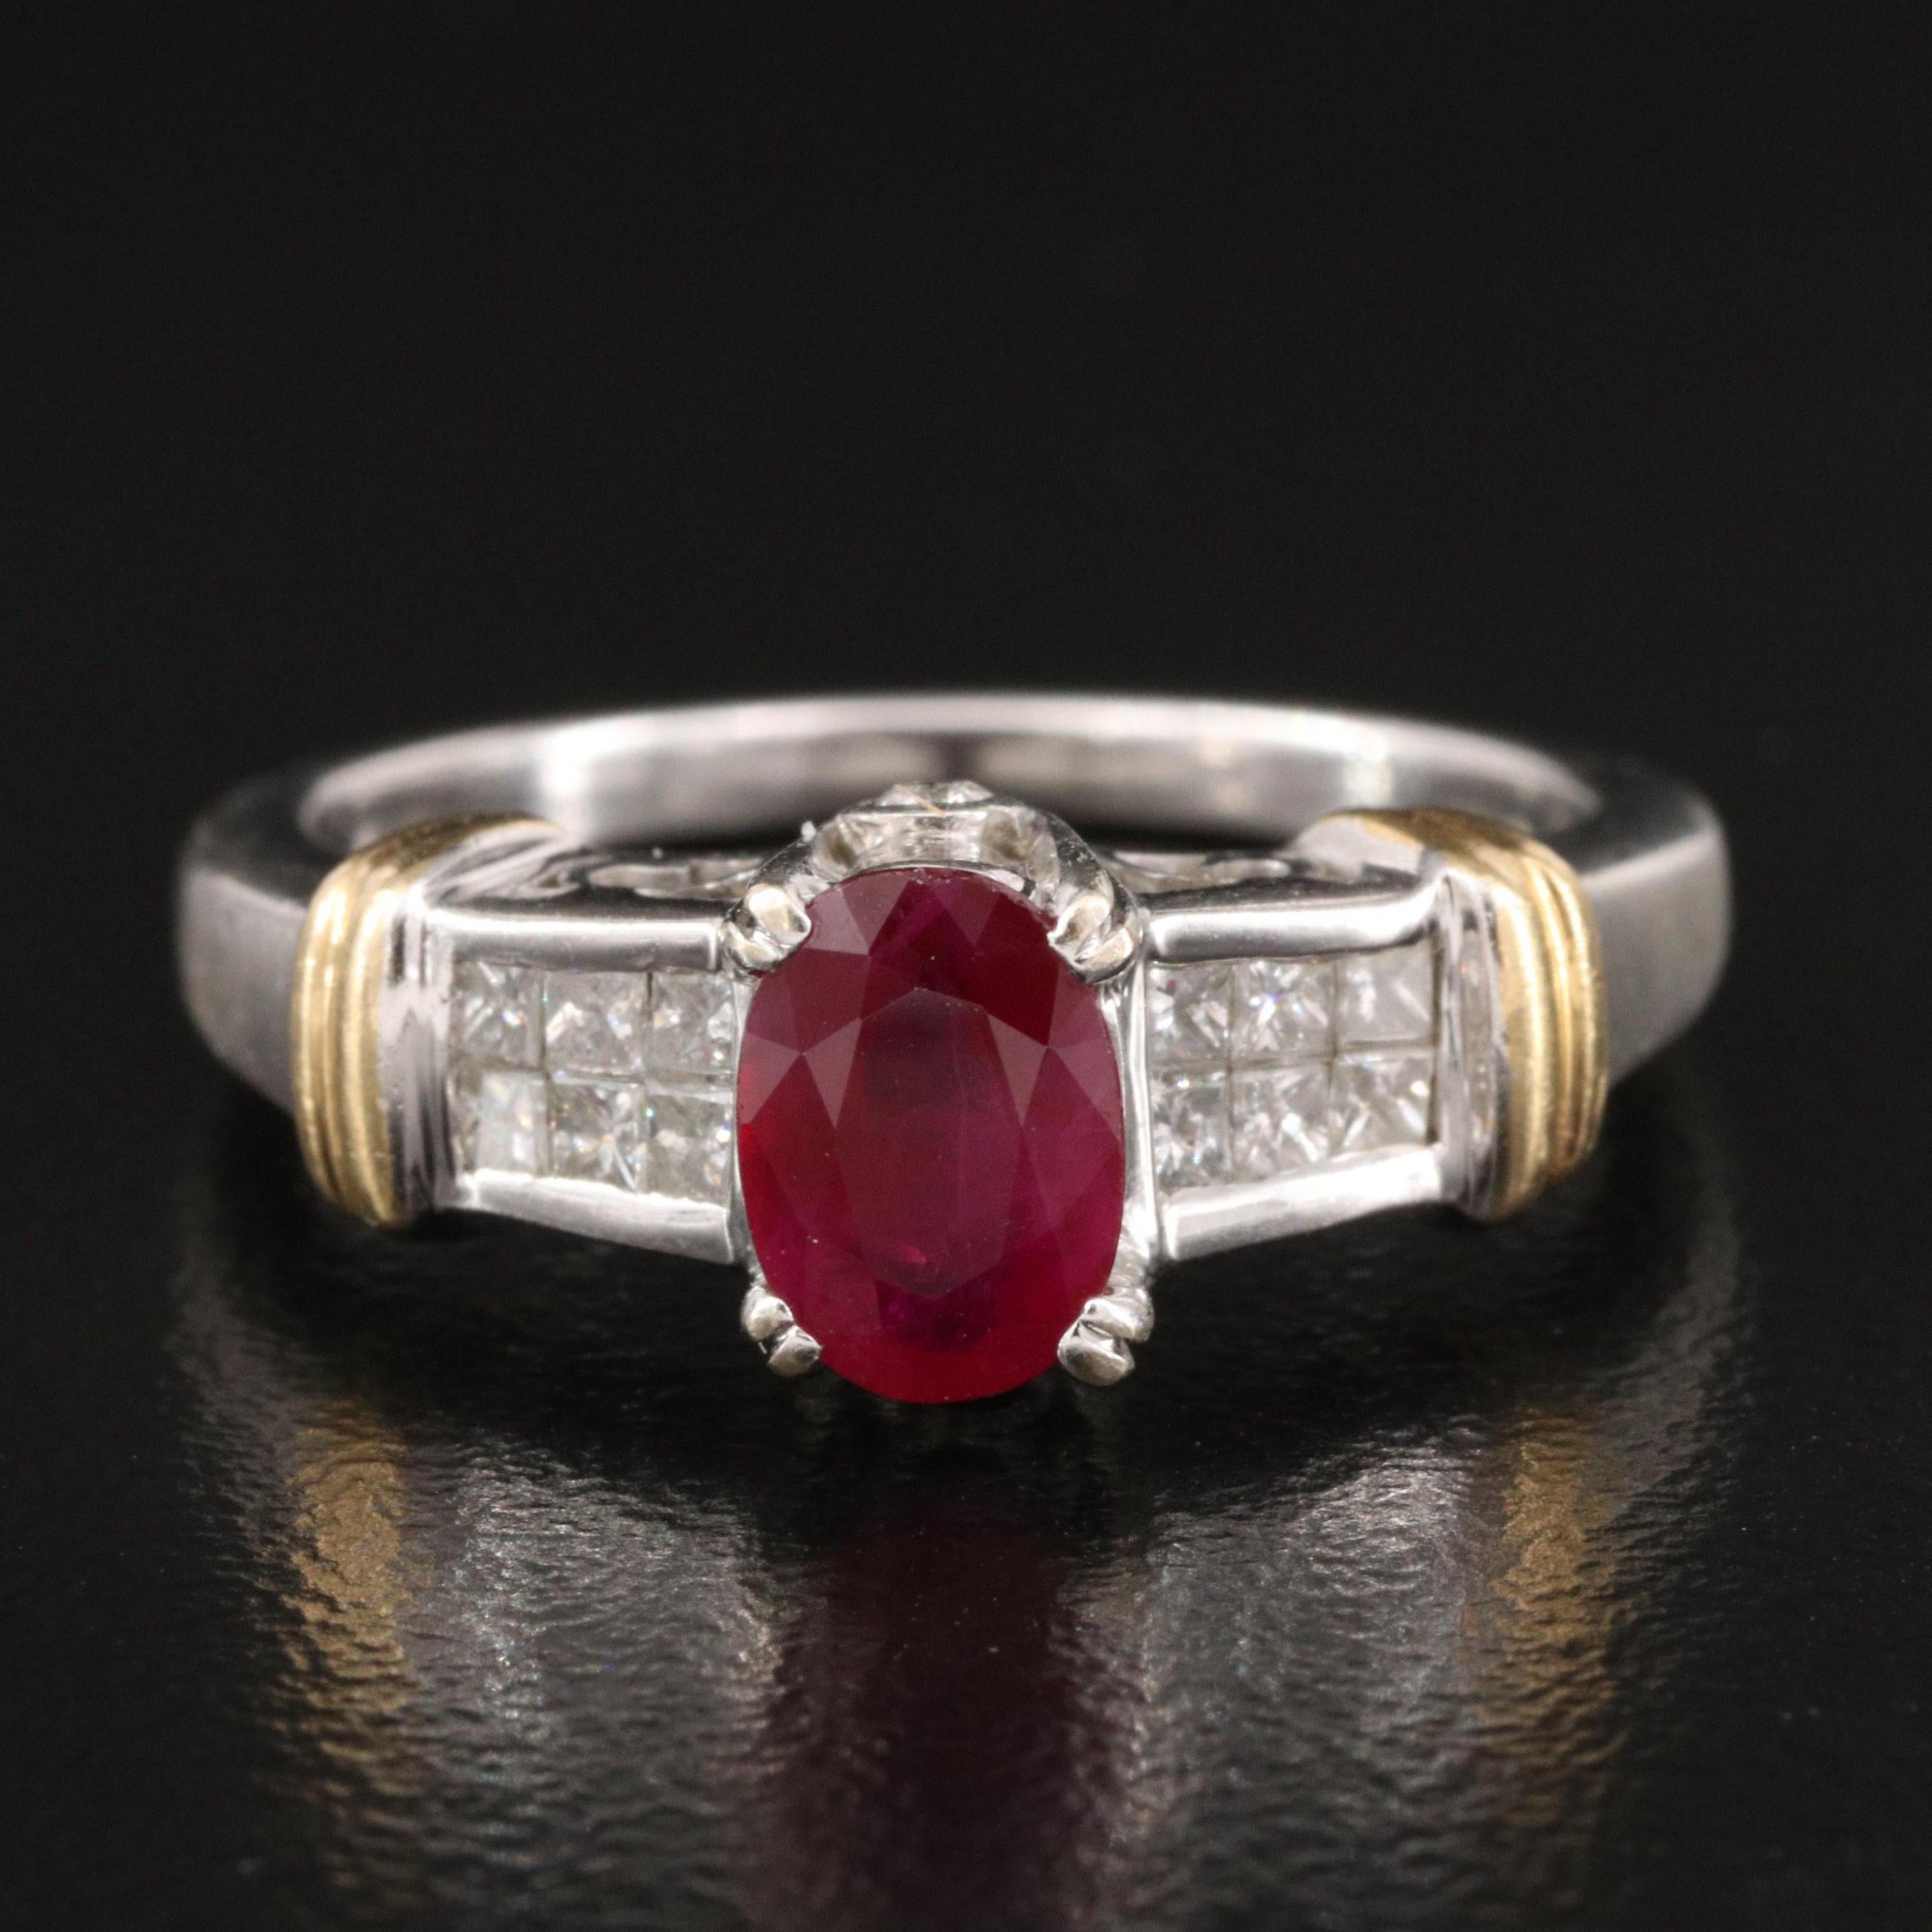 For Sale:  Minimalist Diamond Ruby Engagement Ring, Victorian Ruby White Gold Wedding Ring 7